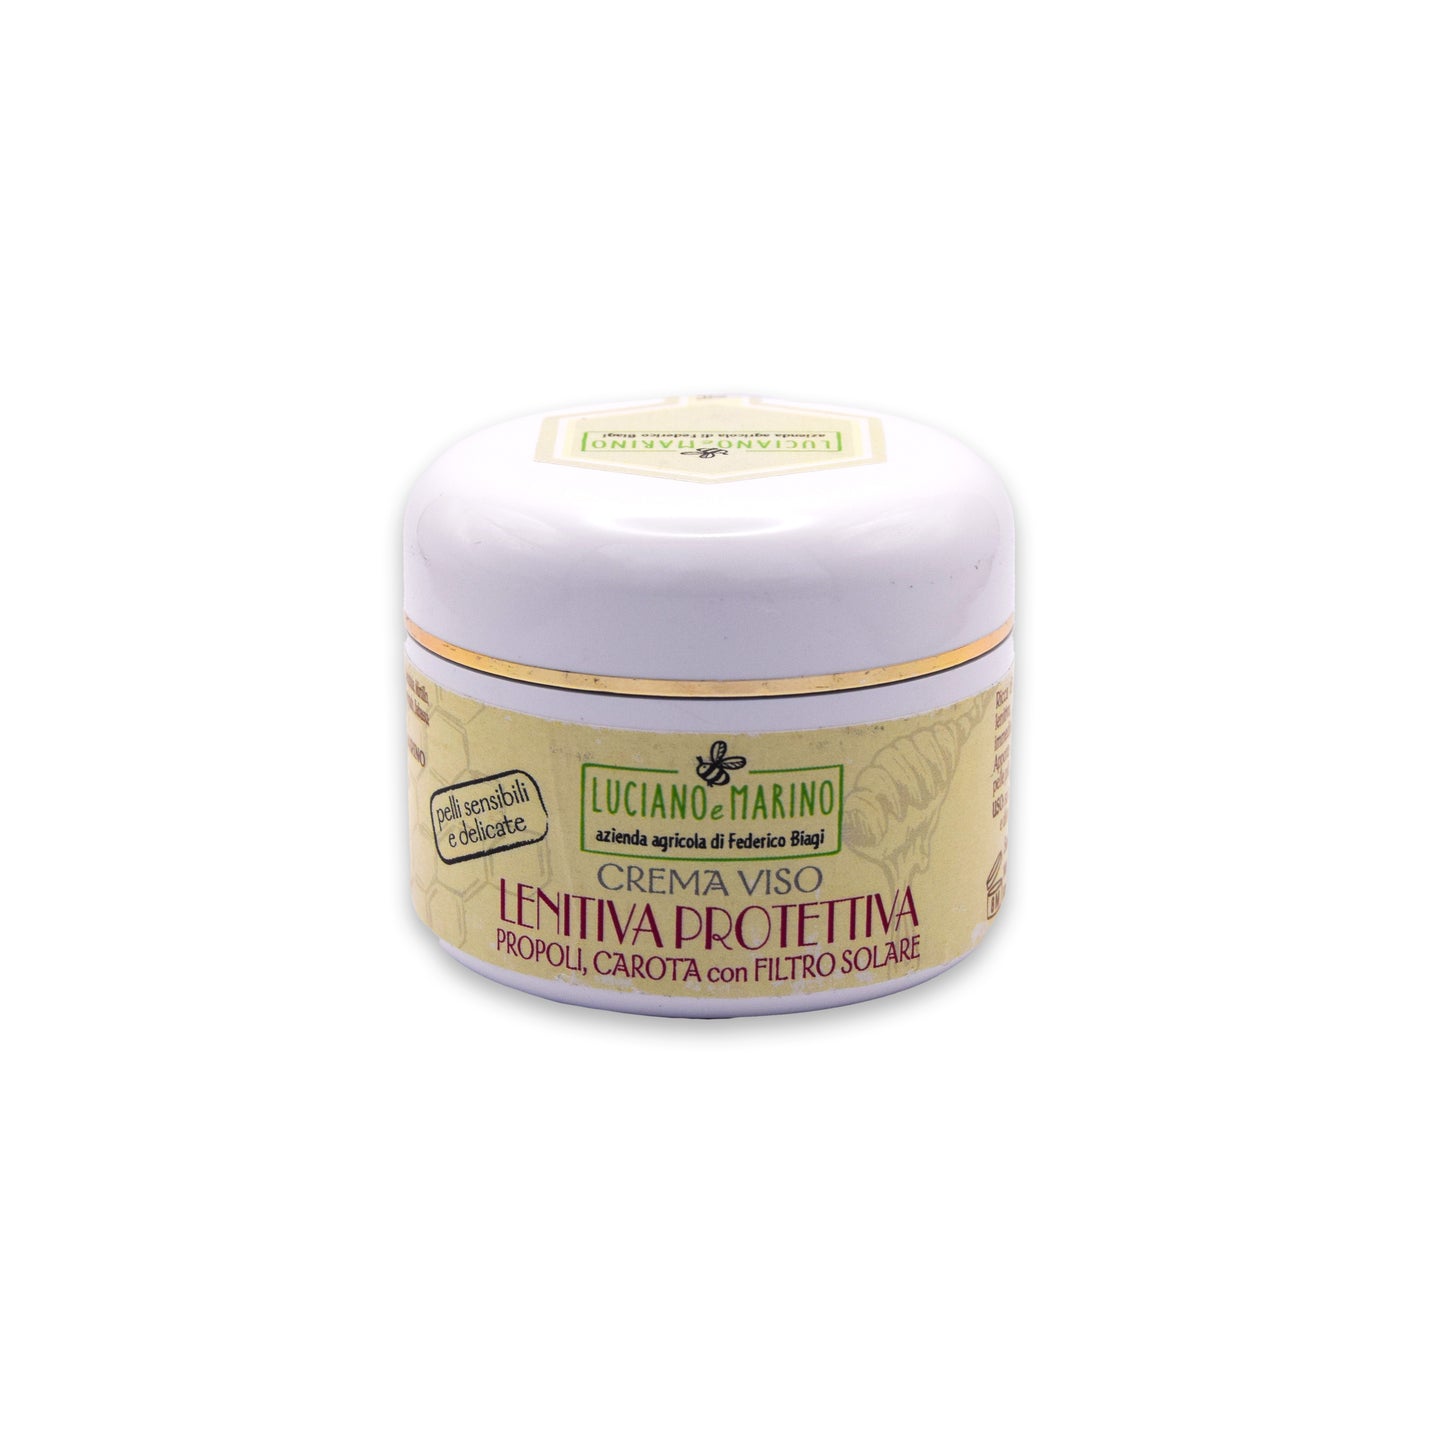 Protective soothing face cream with propolis, carrot and sun filter - 50 ml